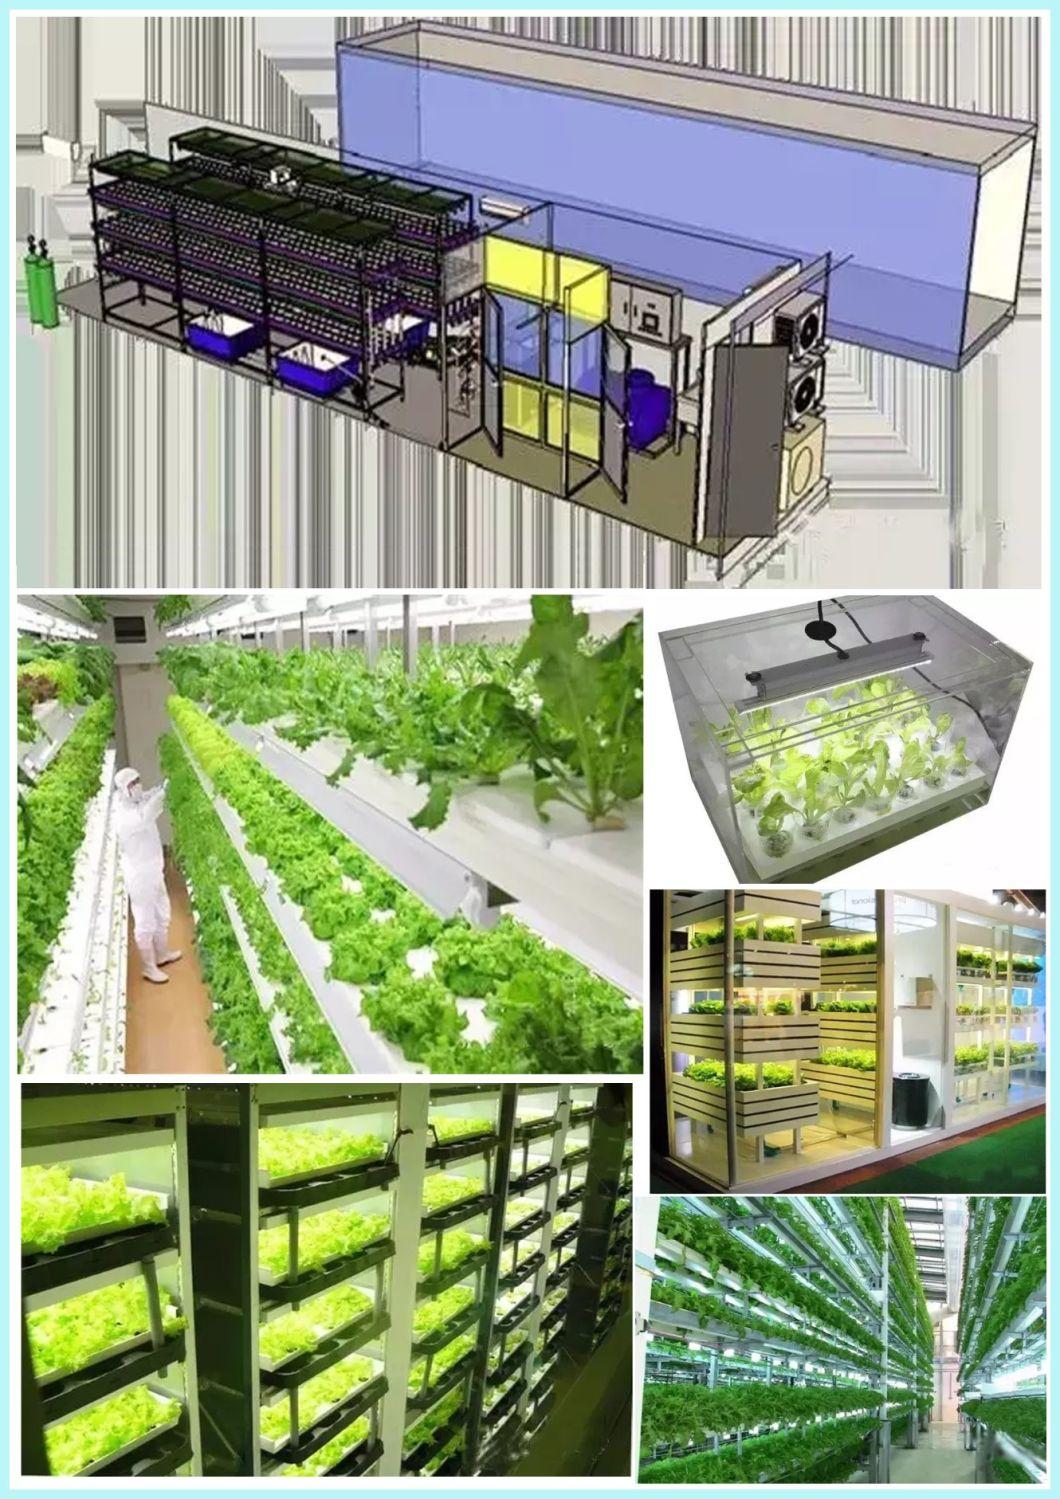 Lp Series 10 Full Spectrum Hydroponic Vertical Farming System Full Spectrum Flowering Bars LED Grow Light for Indoor Weed Medical Plant